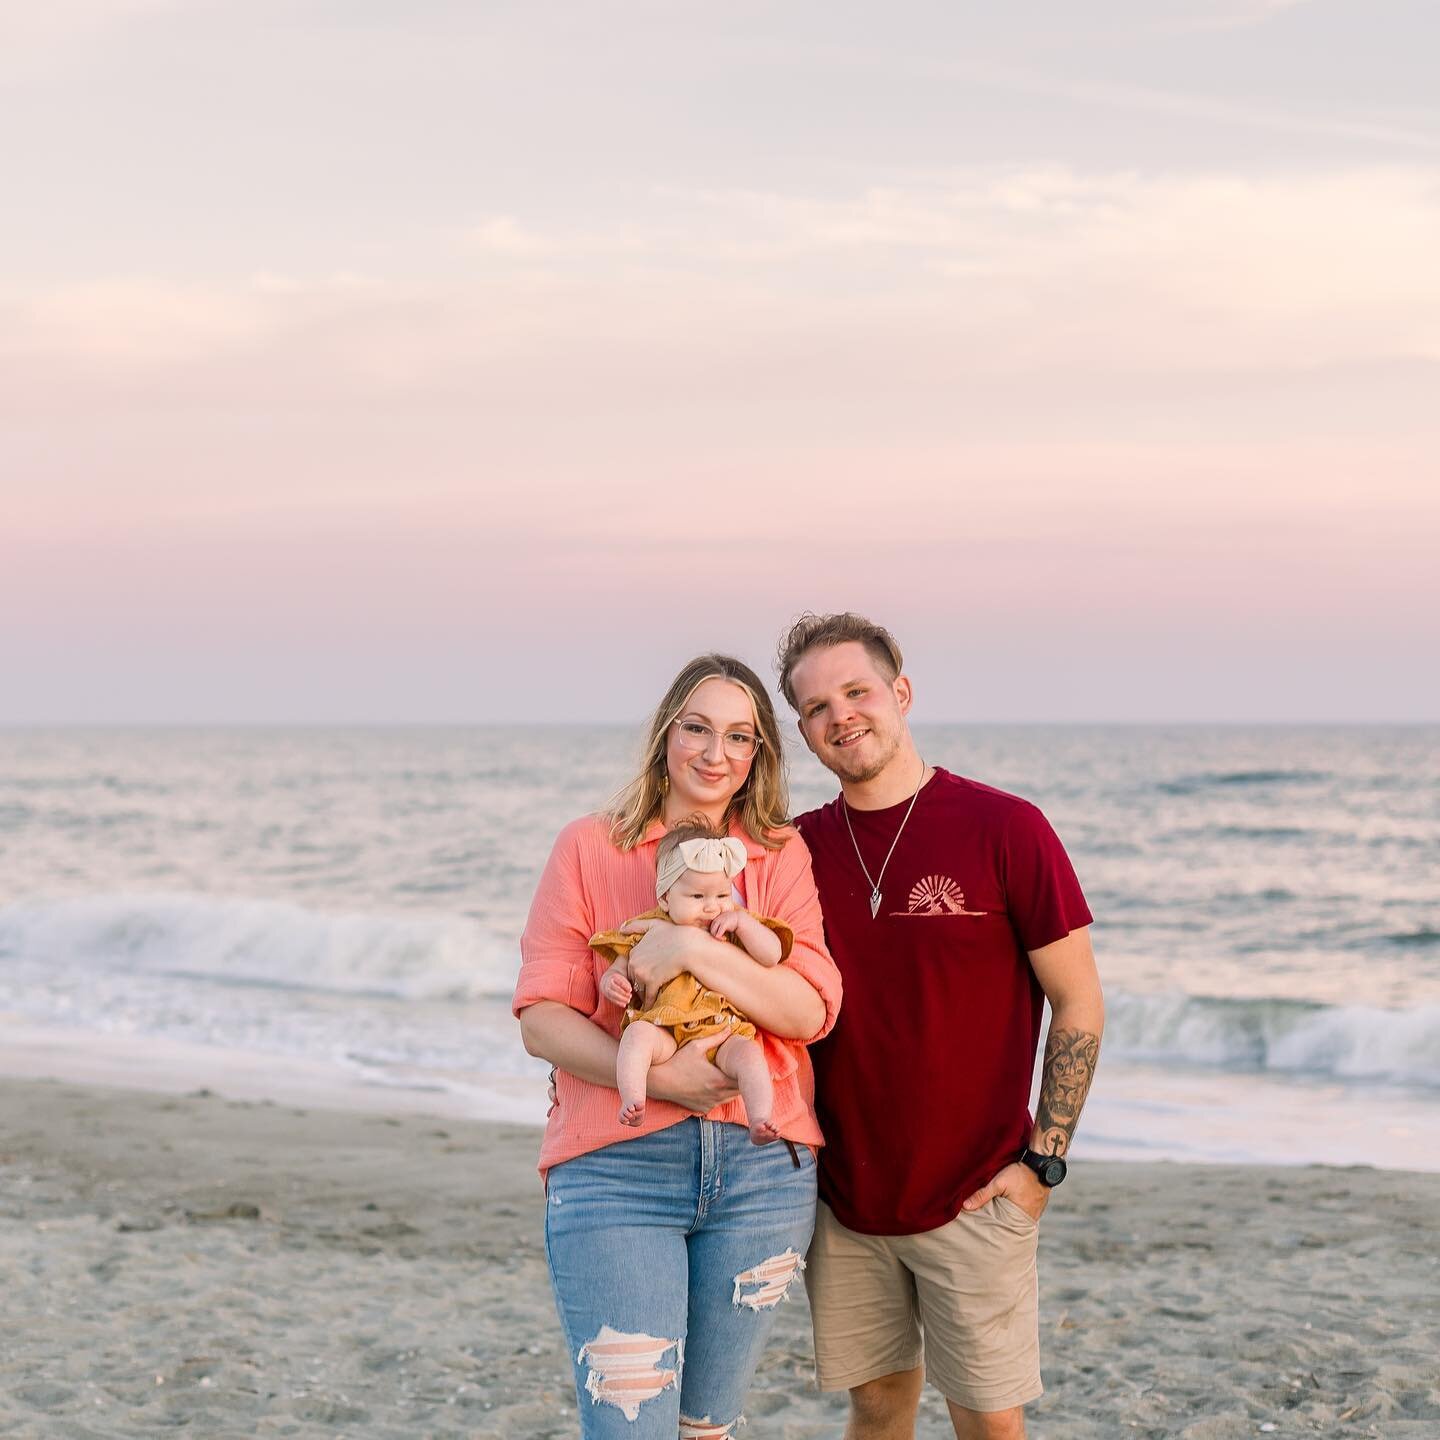 Hey everyone, It&rsquo;s been a while! Let me reintroduce myself. I&rsquo;m Hailee! I&rsquo;ve been married to my amazing husband Andrew for a little over two years now. We also recently welcomed our sweet baby girl Eliya 5 1/2 months ago. Over the p